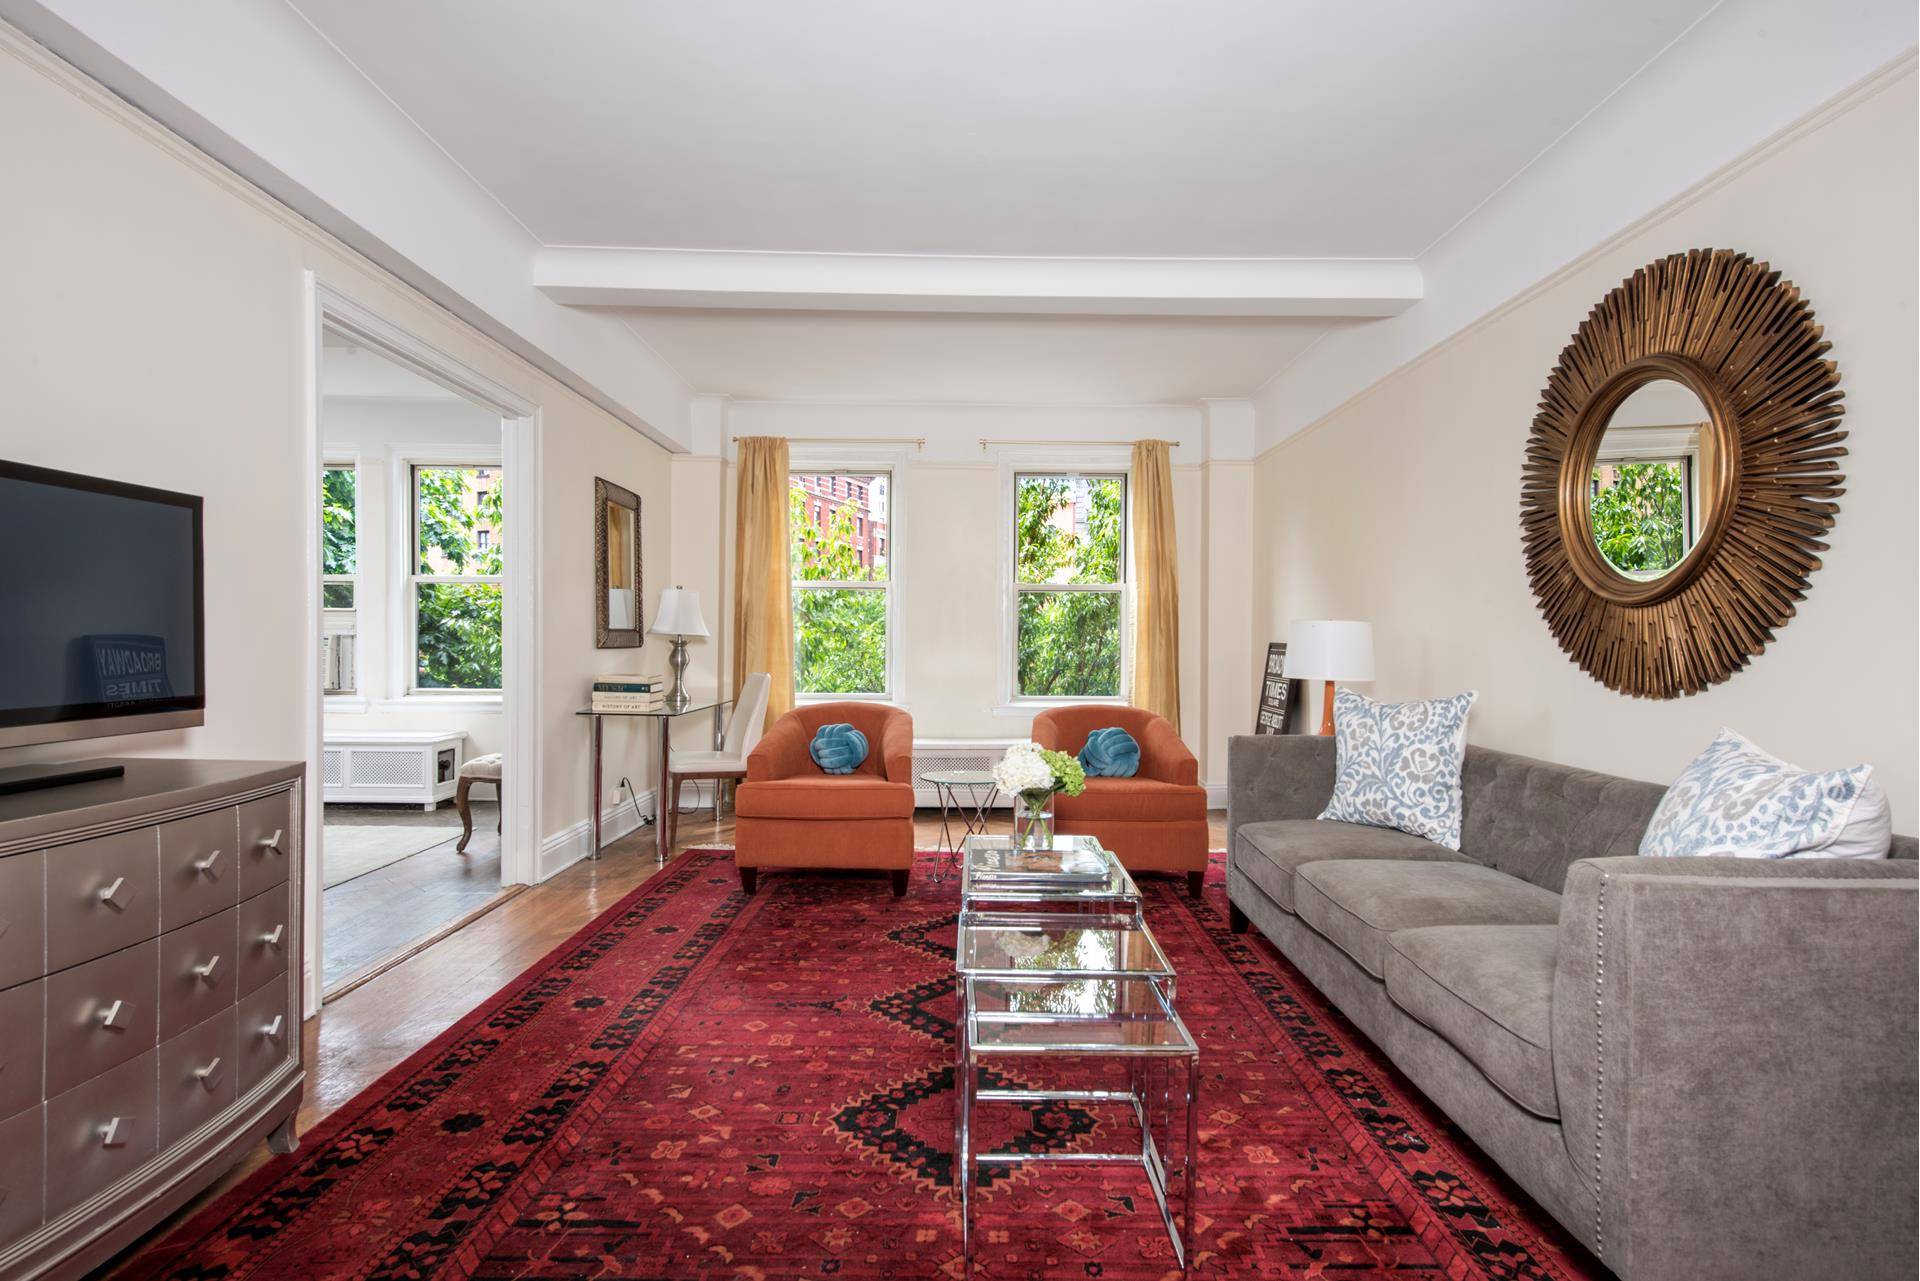 Exceptionally large, 3 bed, 2 bath apartment in one of the most desirable buildings in Manhattan Valley.